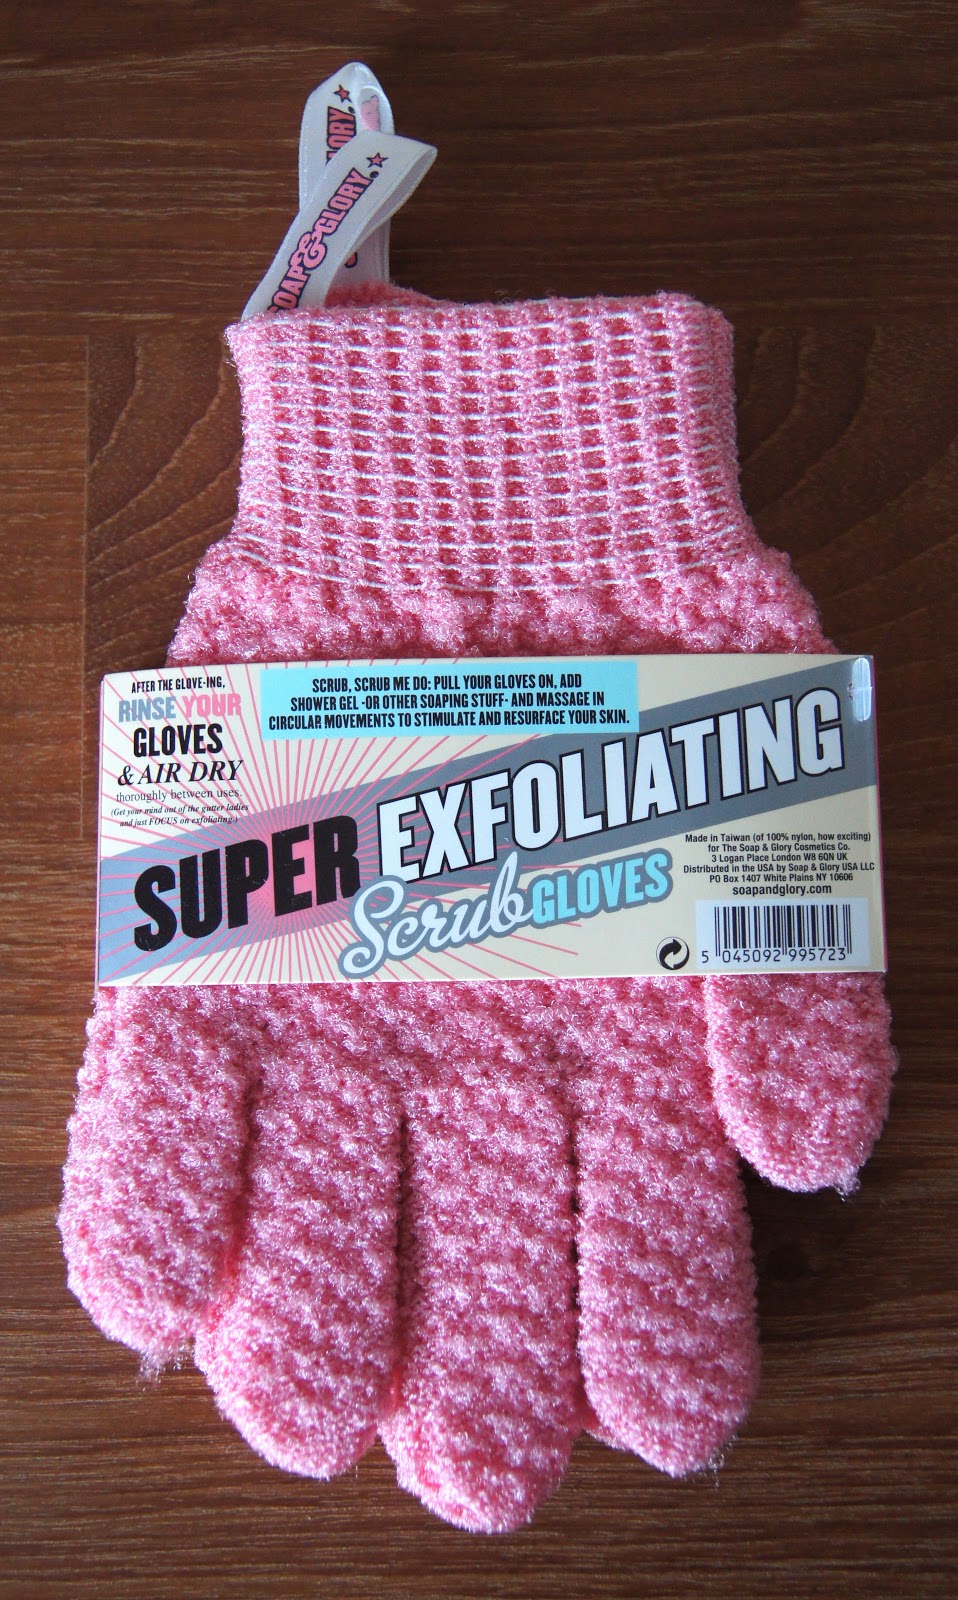 soap and glory super exfoliating scrub gloves review